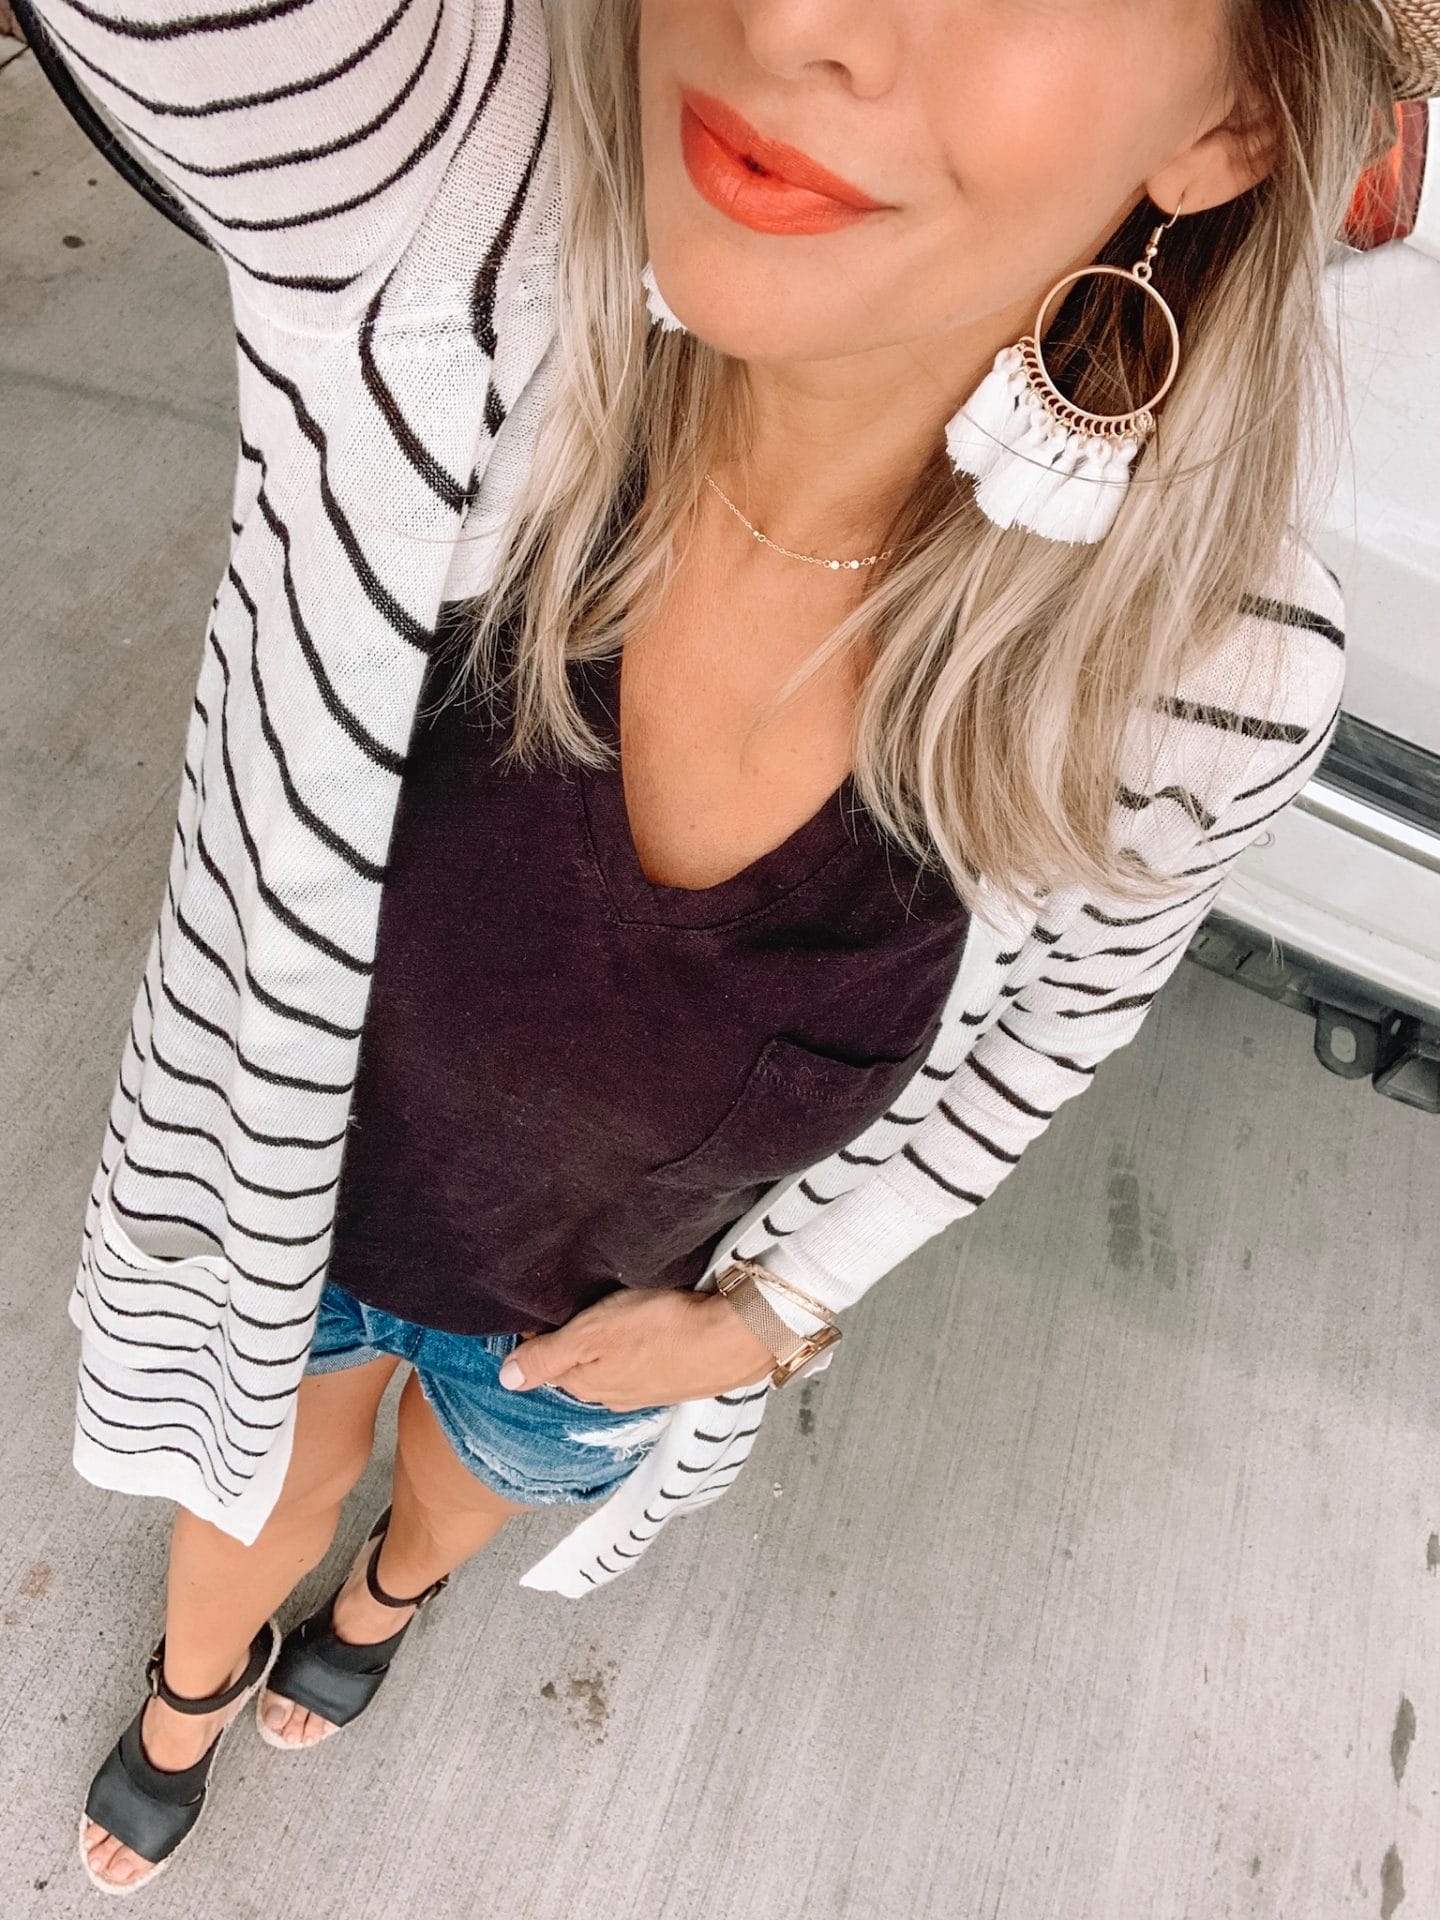 Striped Cardigan and jean shorts